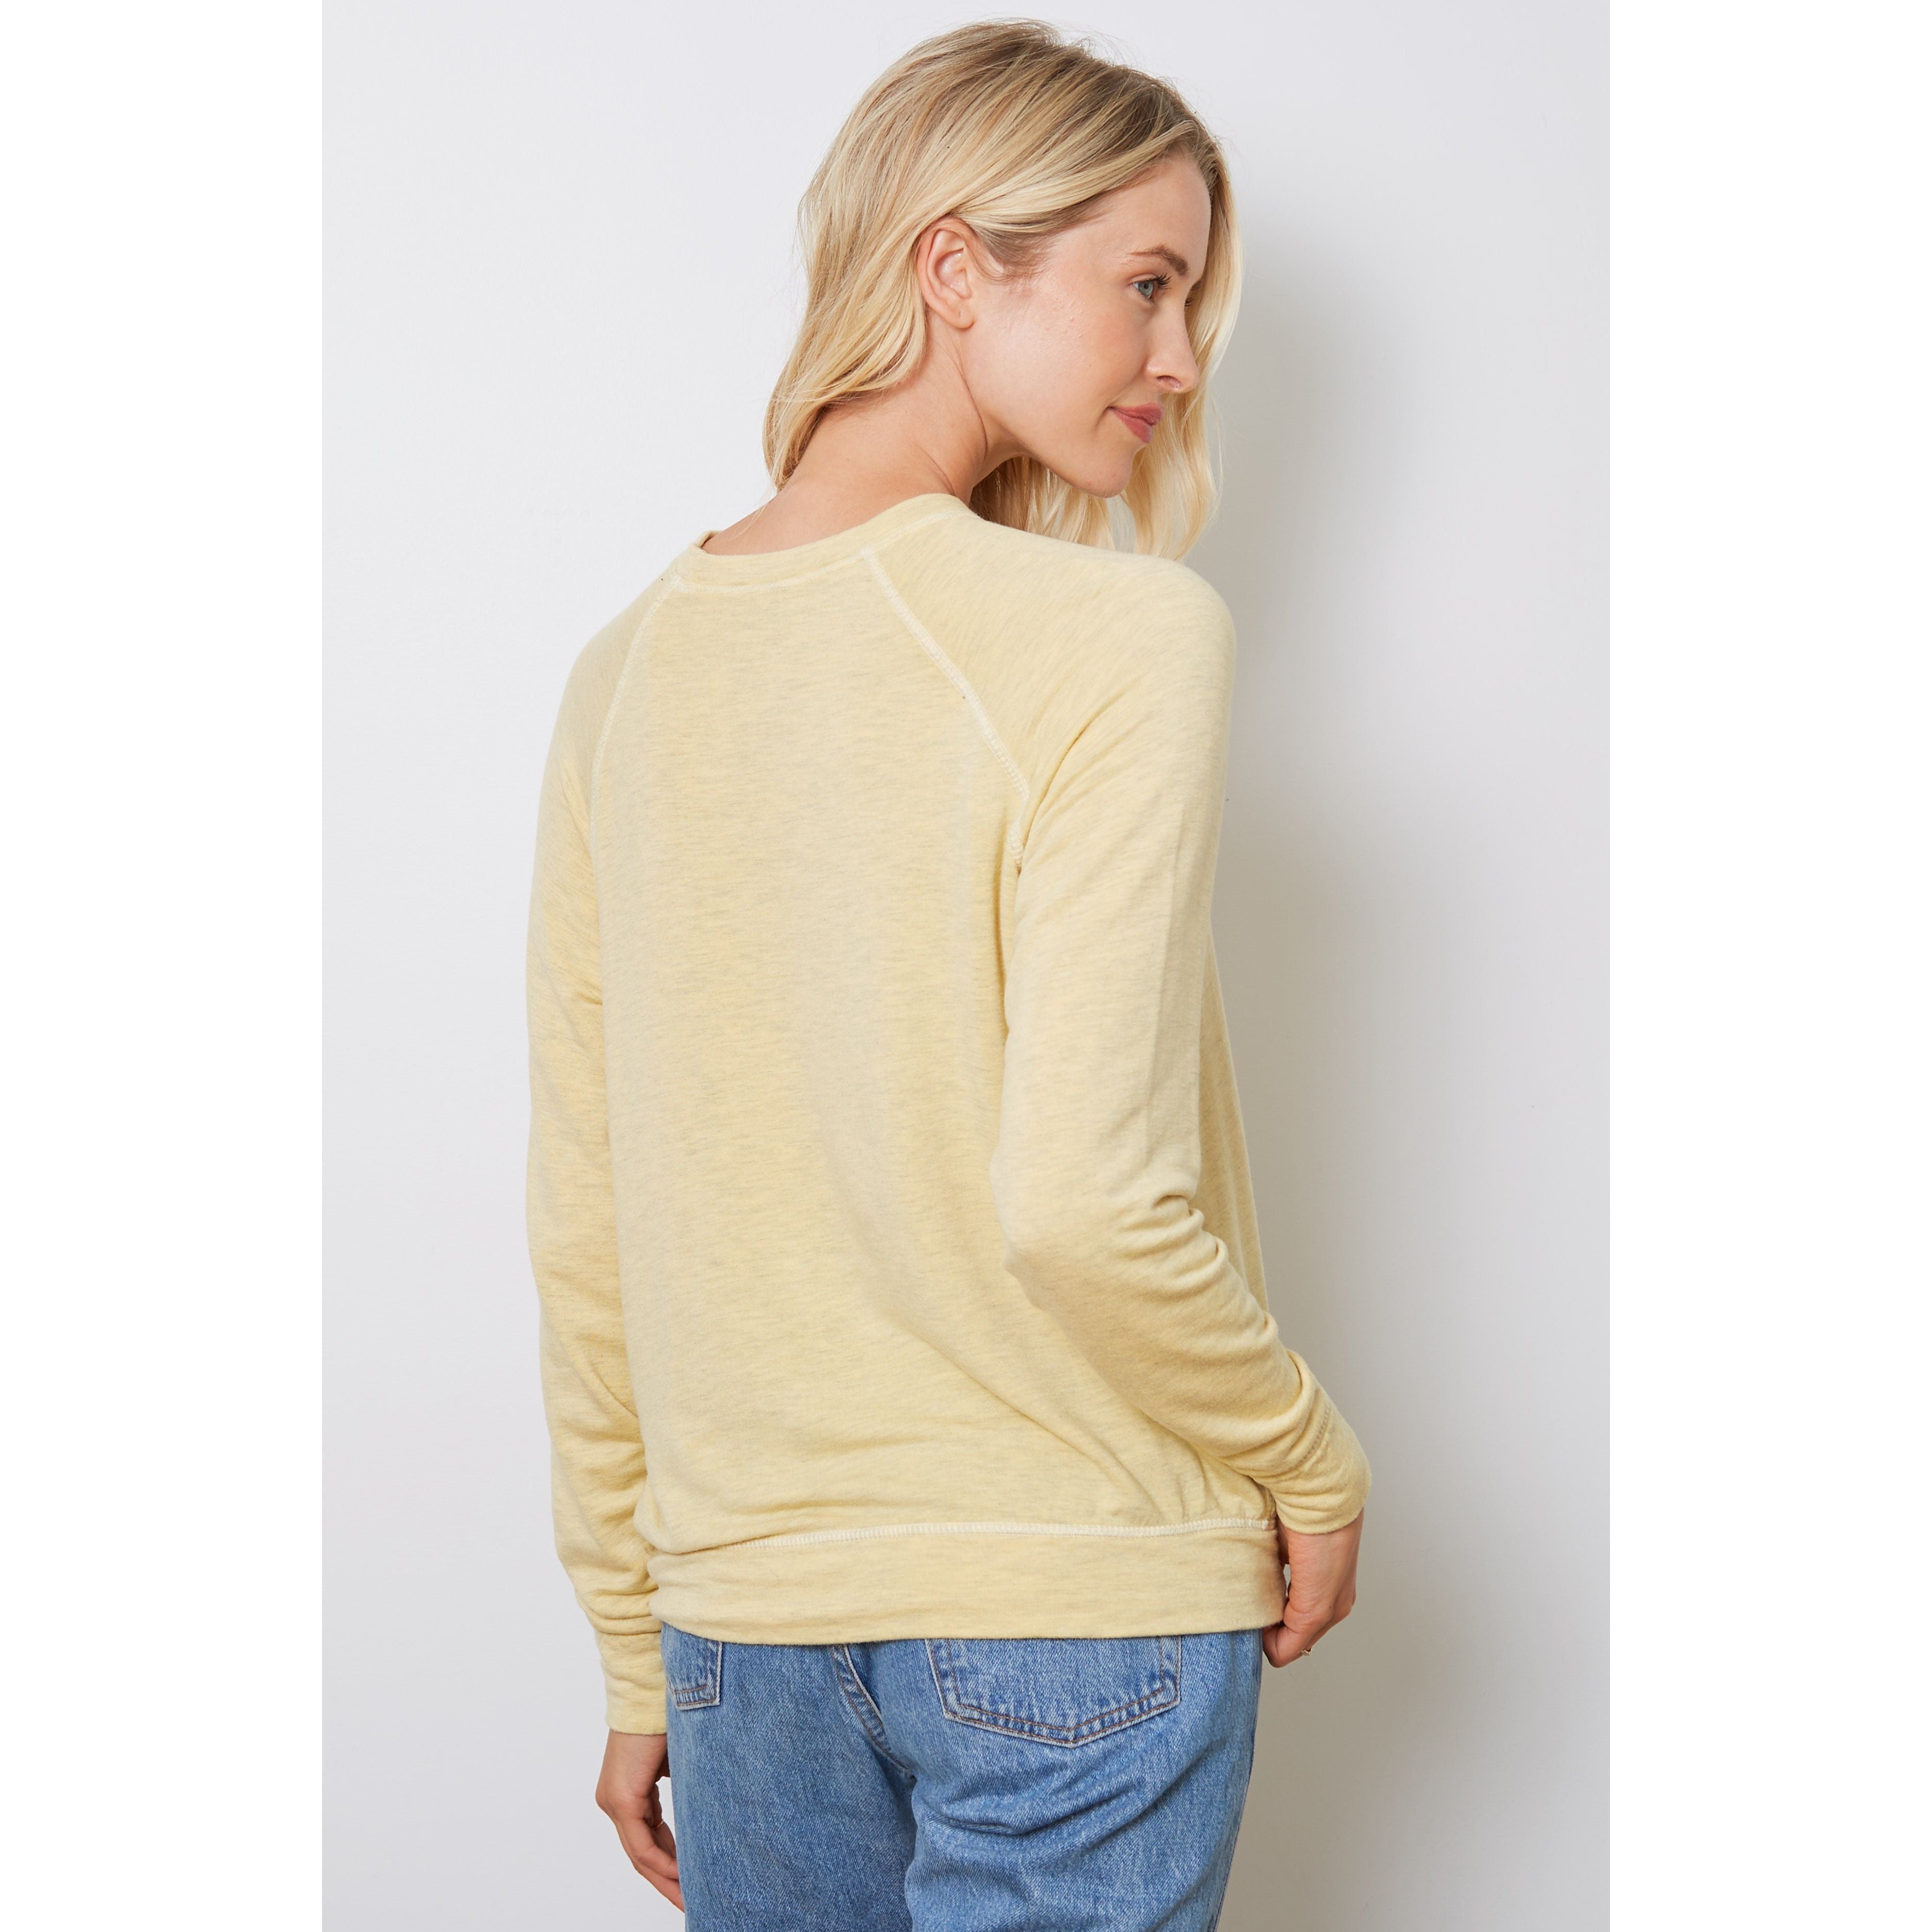 Good Hyouman - See You On the Sunny Side Smith Sweatshirt in Pale Banana